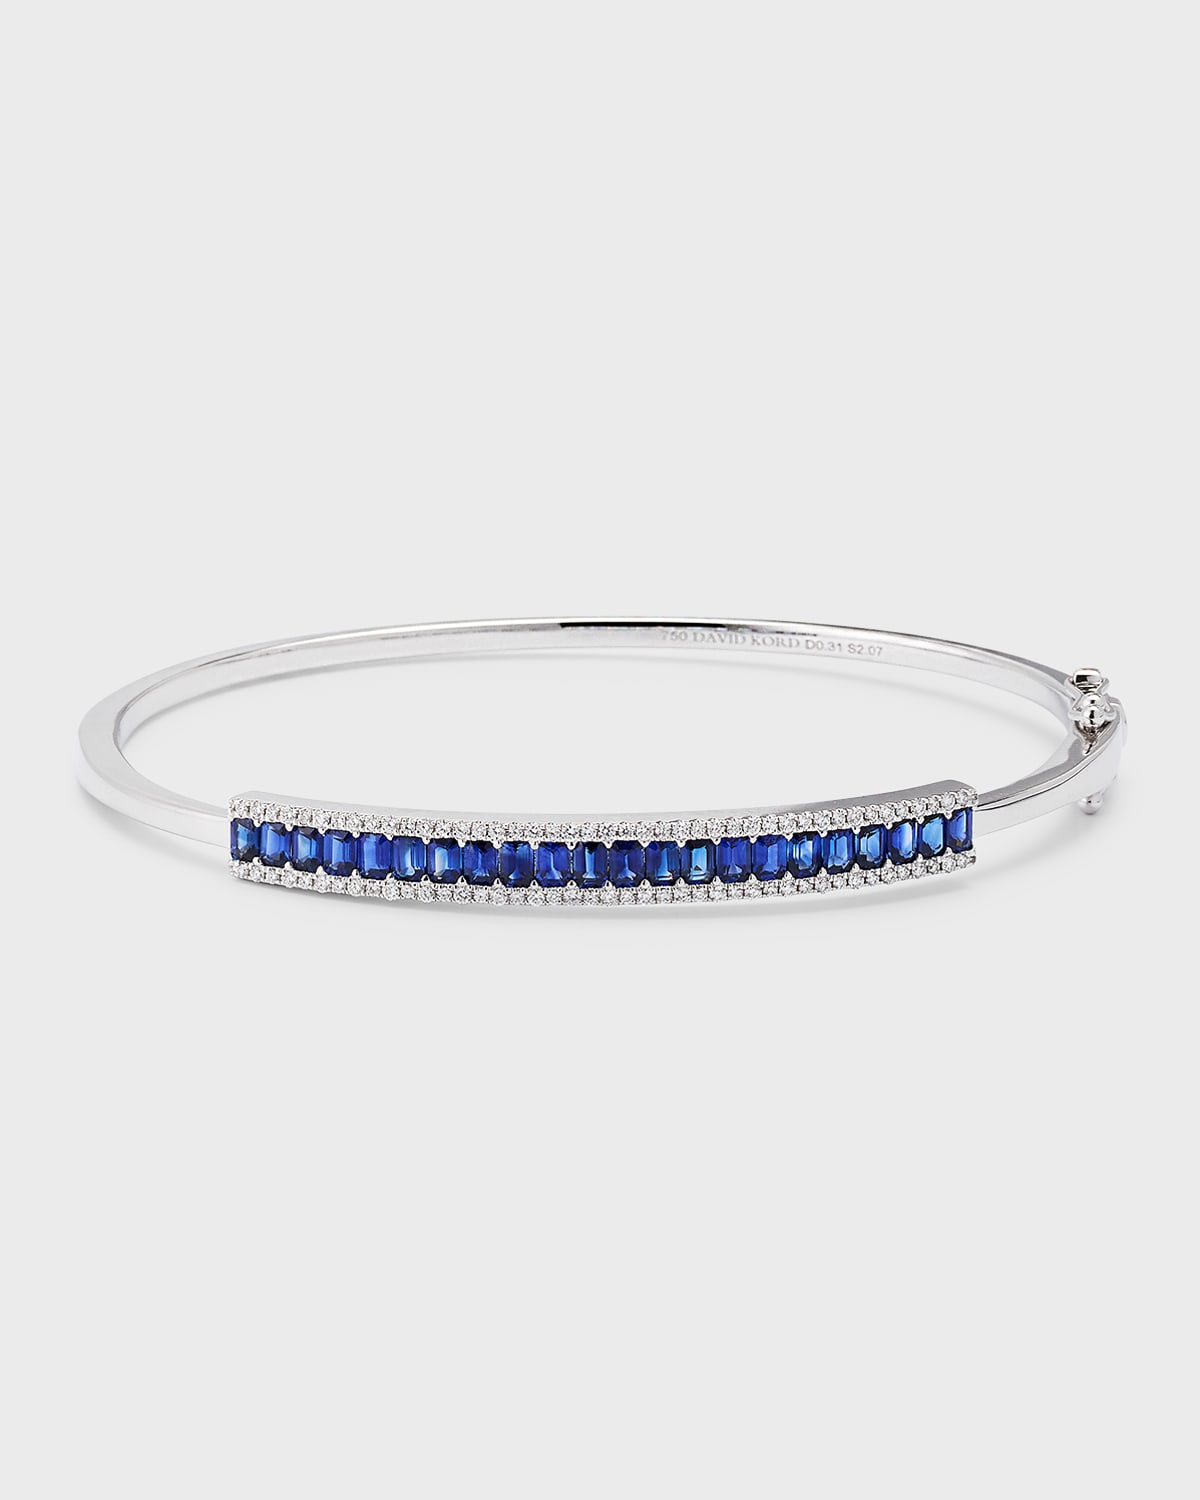 18K White Gold Bangle with Blue Sapphires and Diamonds